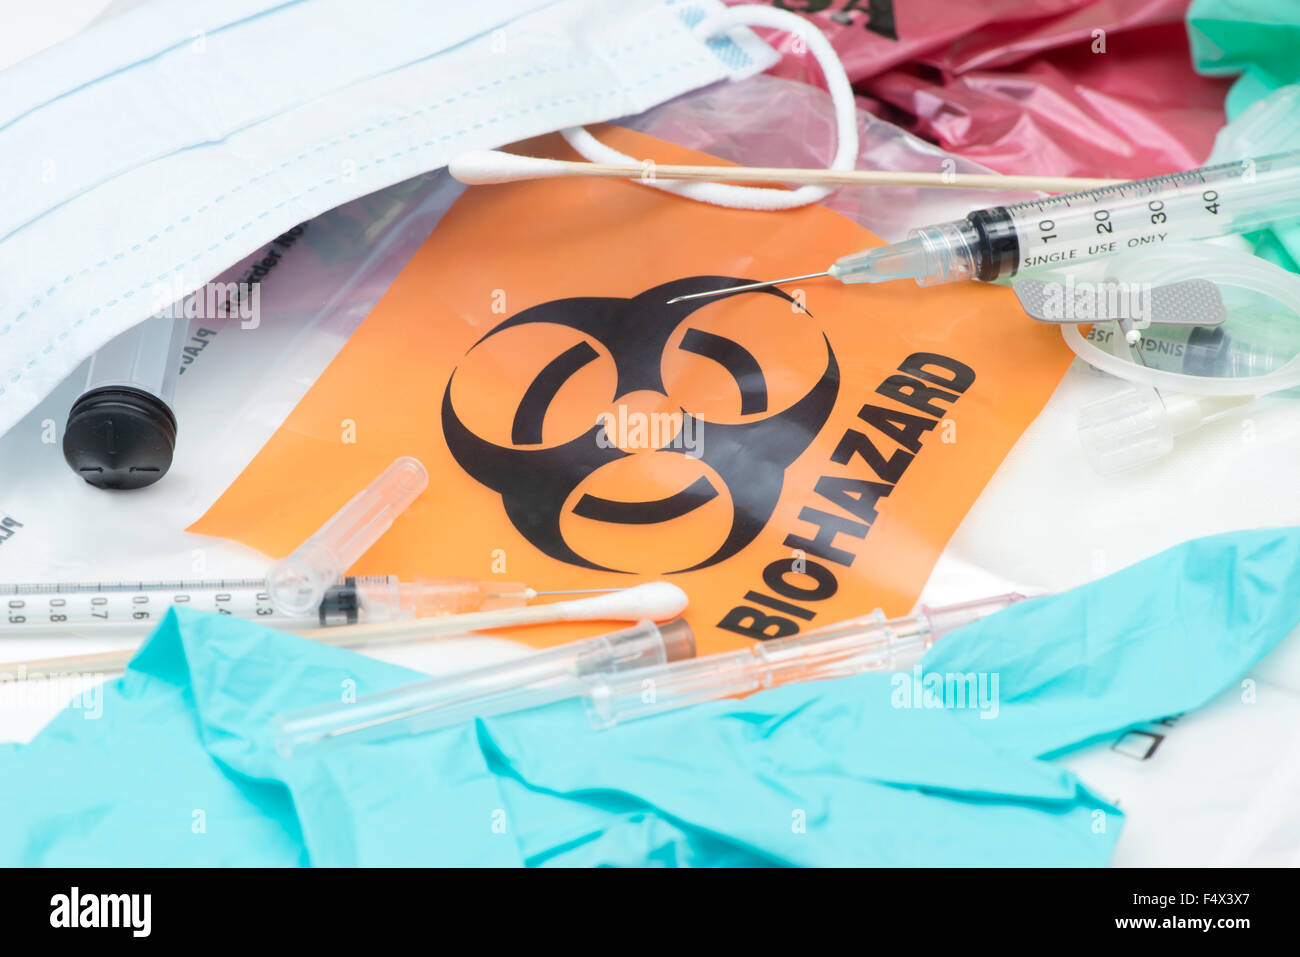 Biohazard waste bags with used syringes,  needles, bandages, and other medical waste. Stock Photo